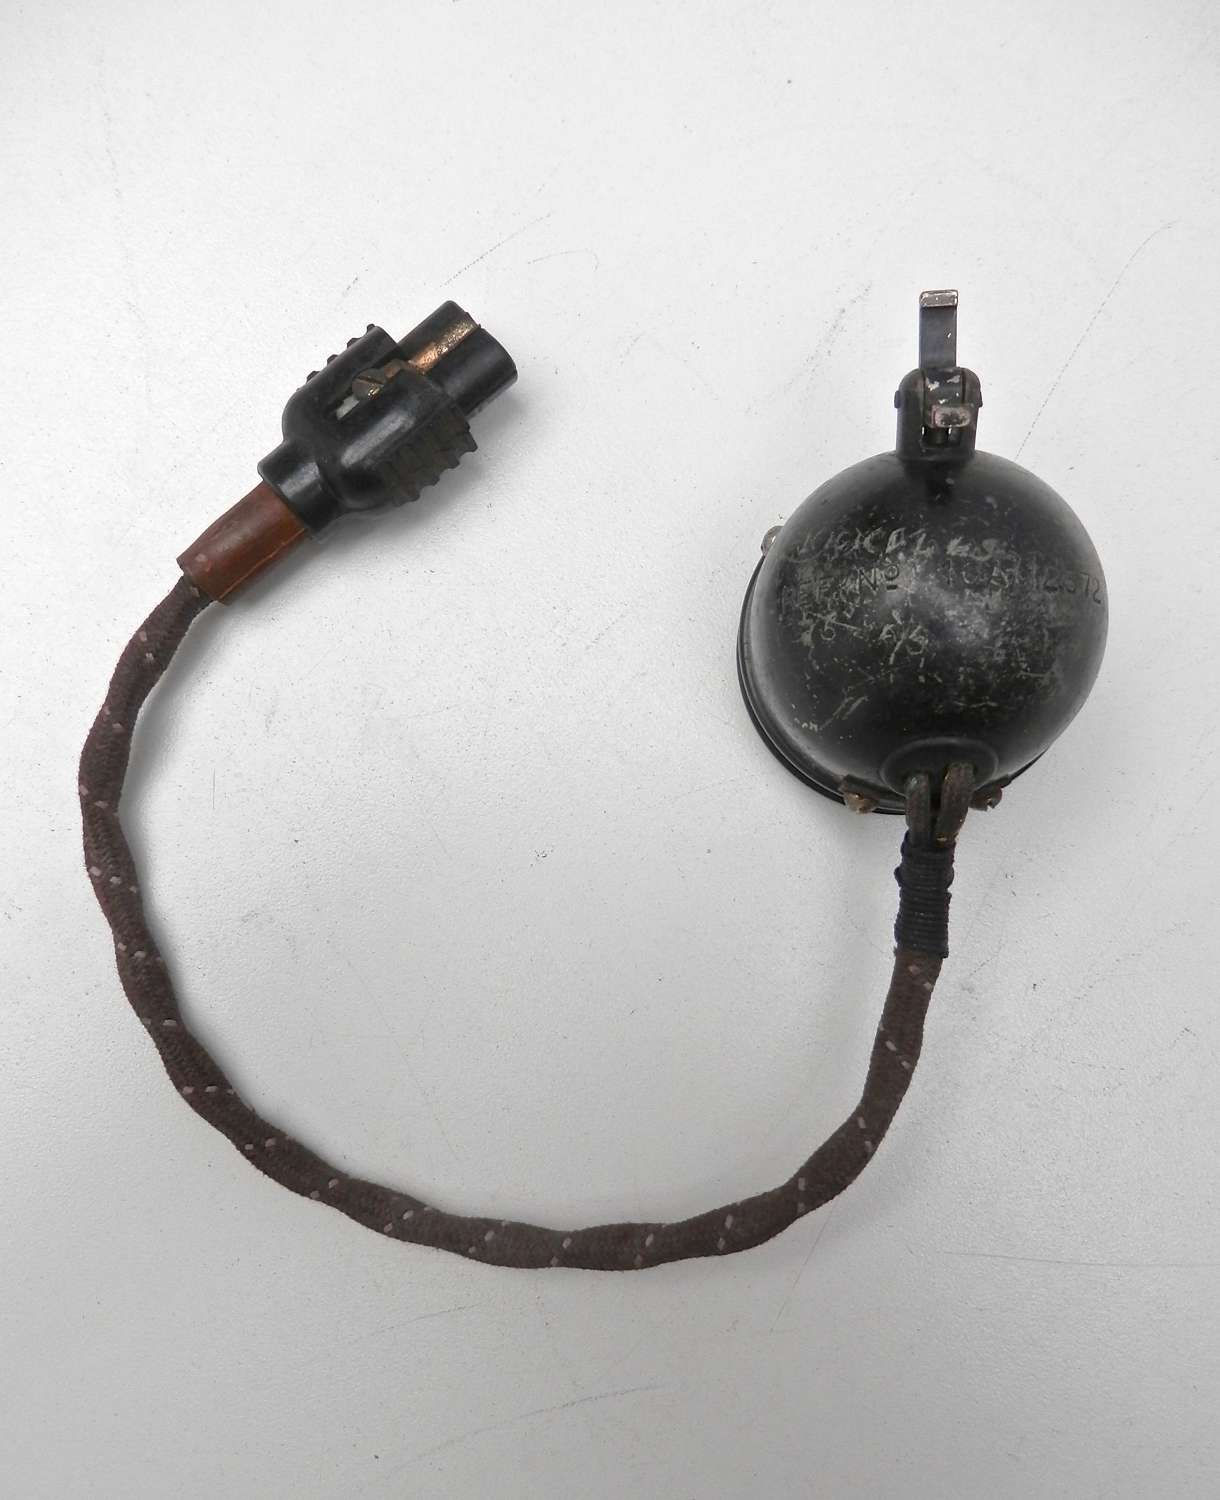 RAF type 28 carbon microphone with wiring loom